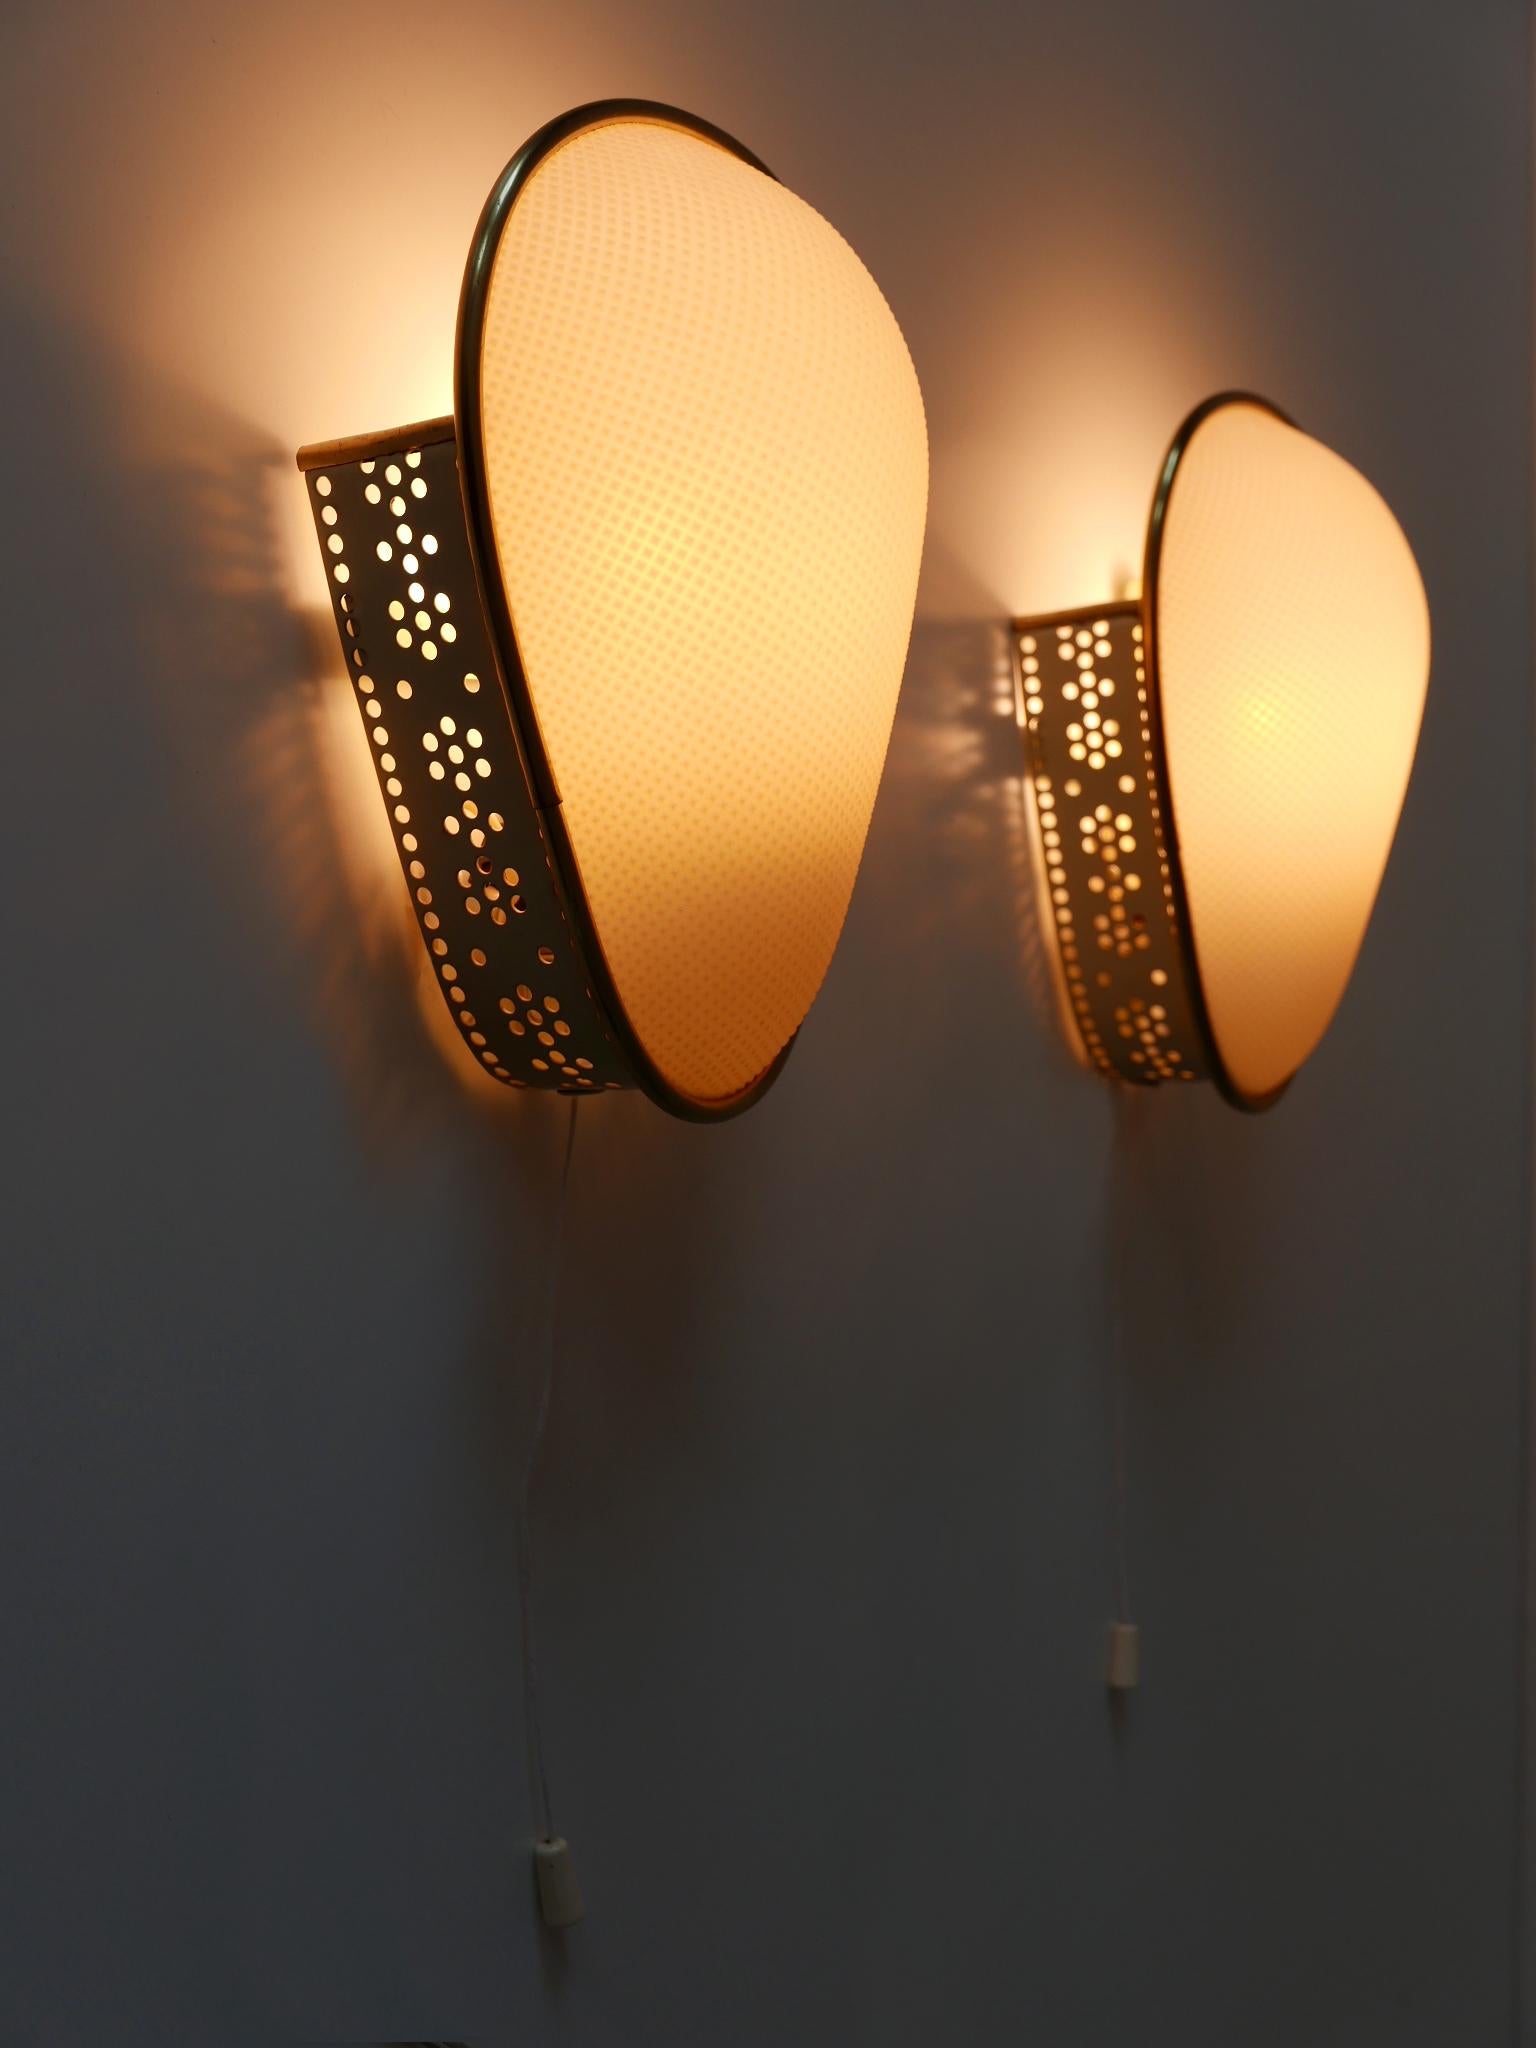 Set of Two Rare & Elegant Mid-Century Modern Sconces or Wall Lamps Germany 1950s For Sale 7